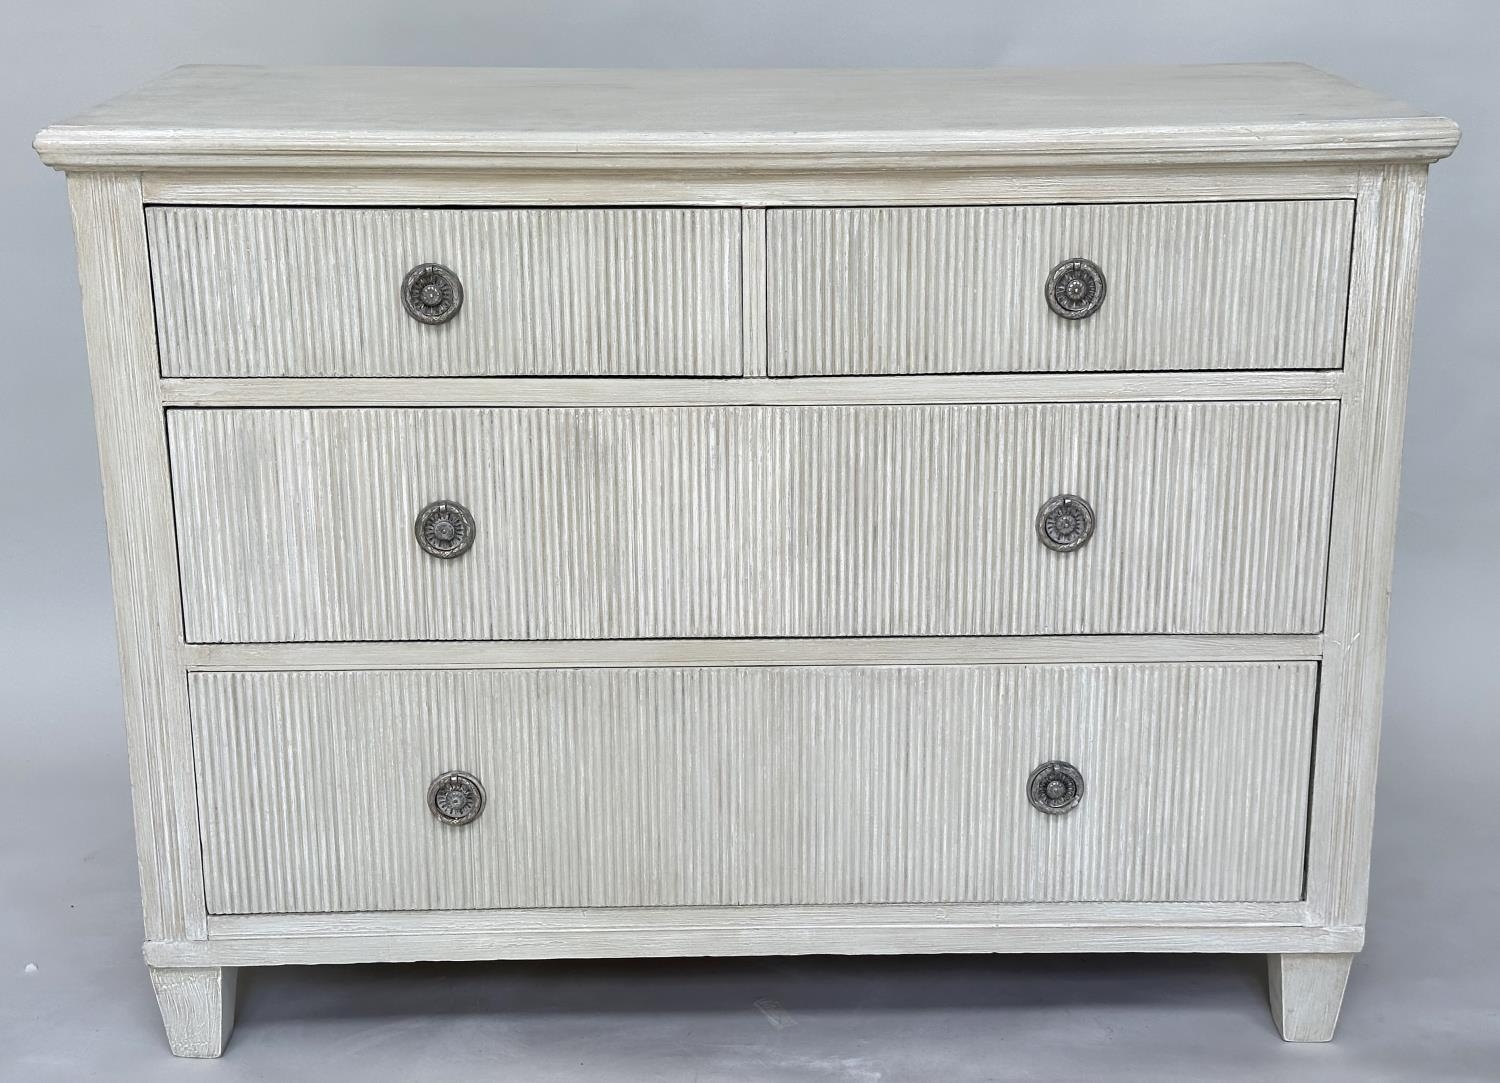 GUSTAVIAN STYLE COMMODE, 19th century Continental grey painted with four drawers and tapering - Image 3 of 7